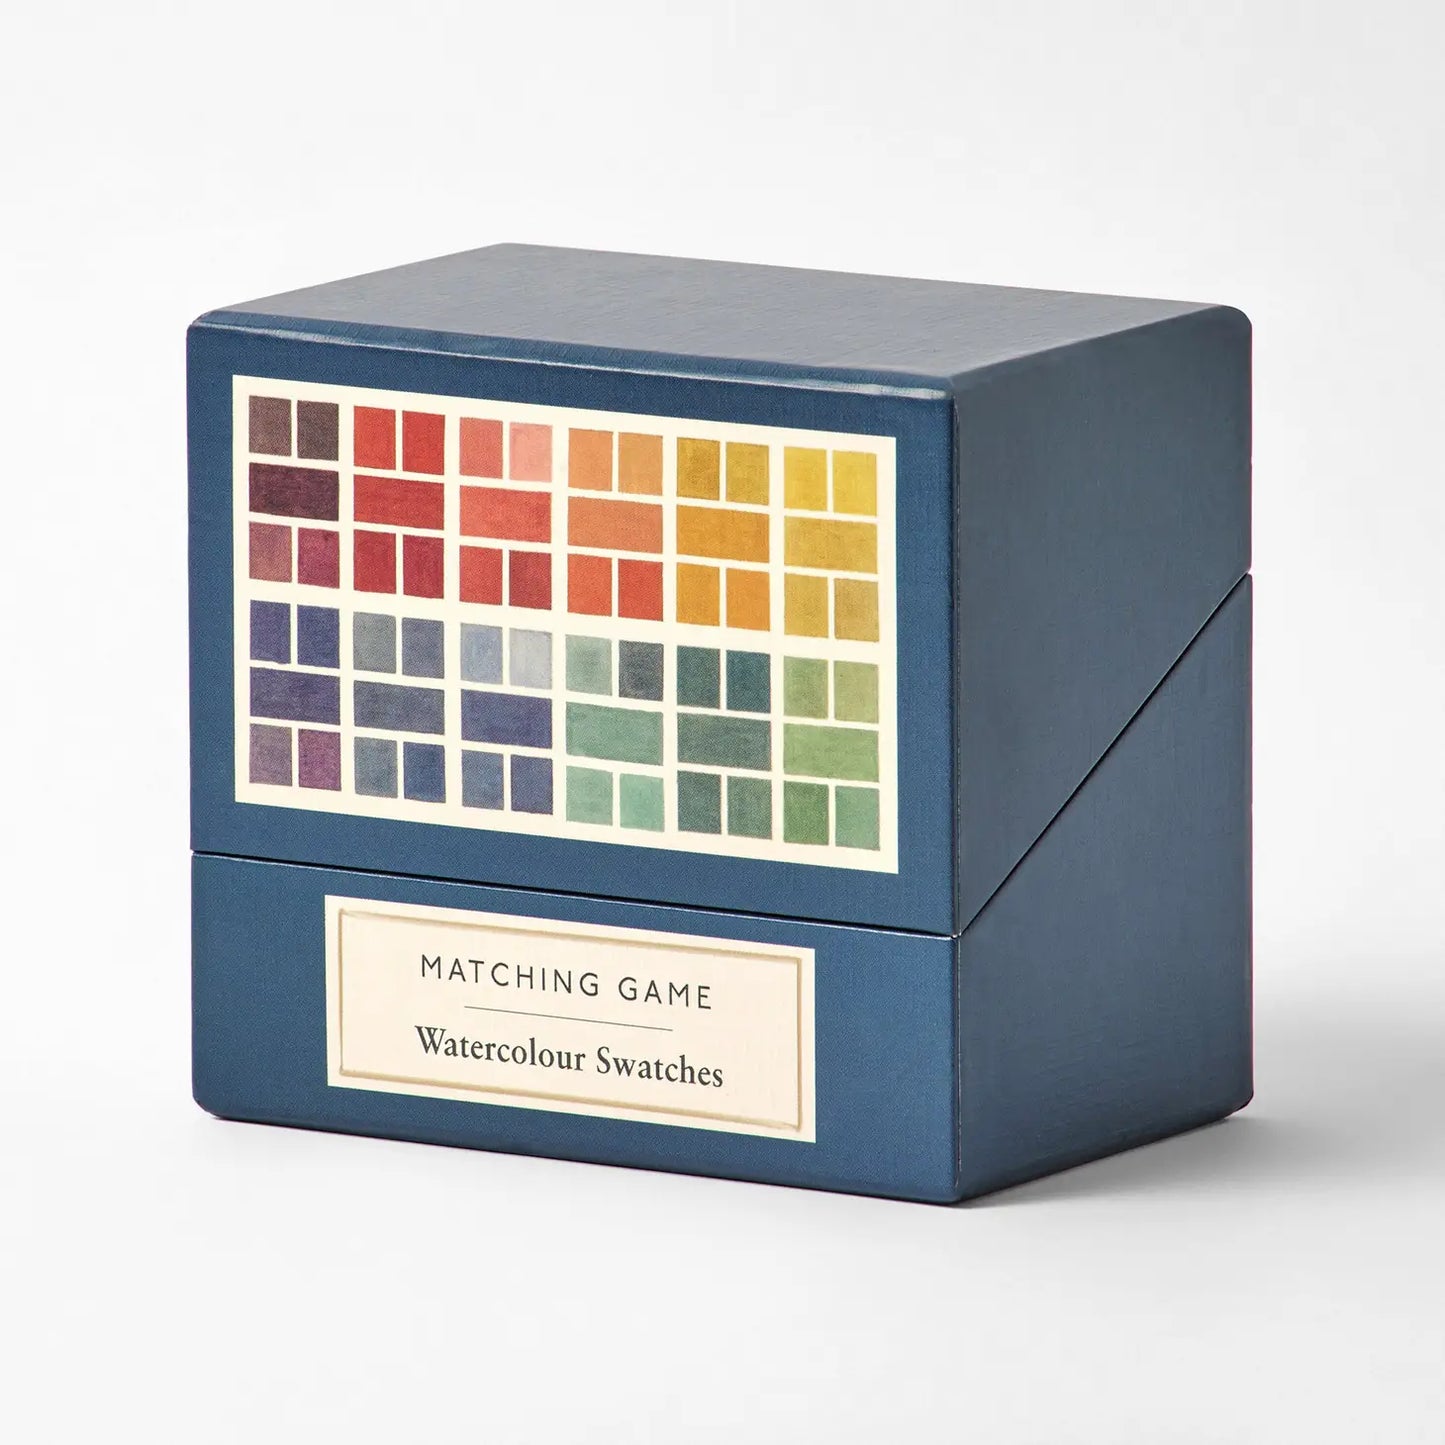 Watercolour swatches matching game